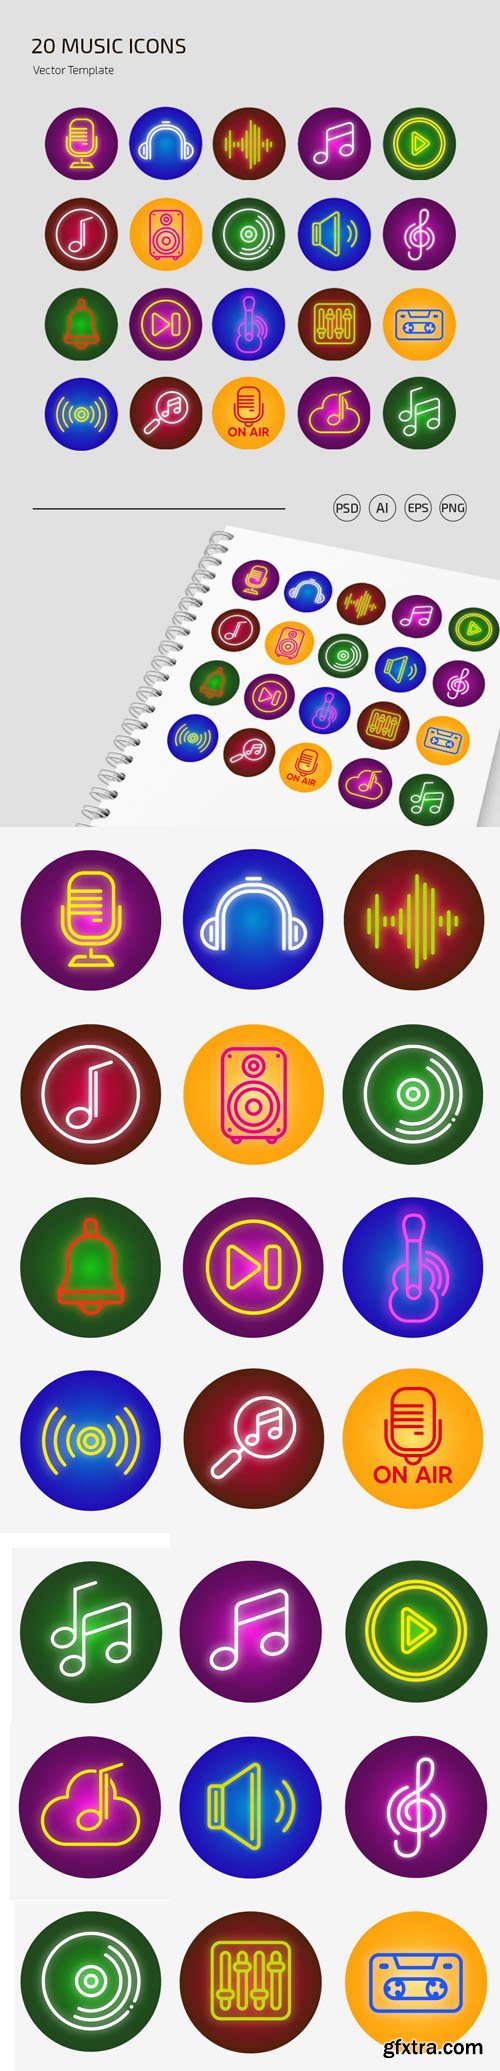 20 Music Icons PSD Templates + Vectors